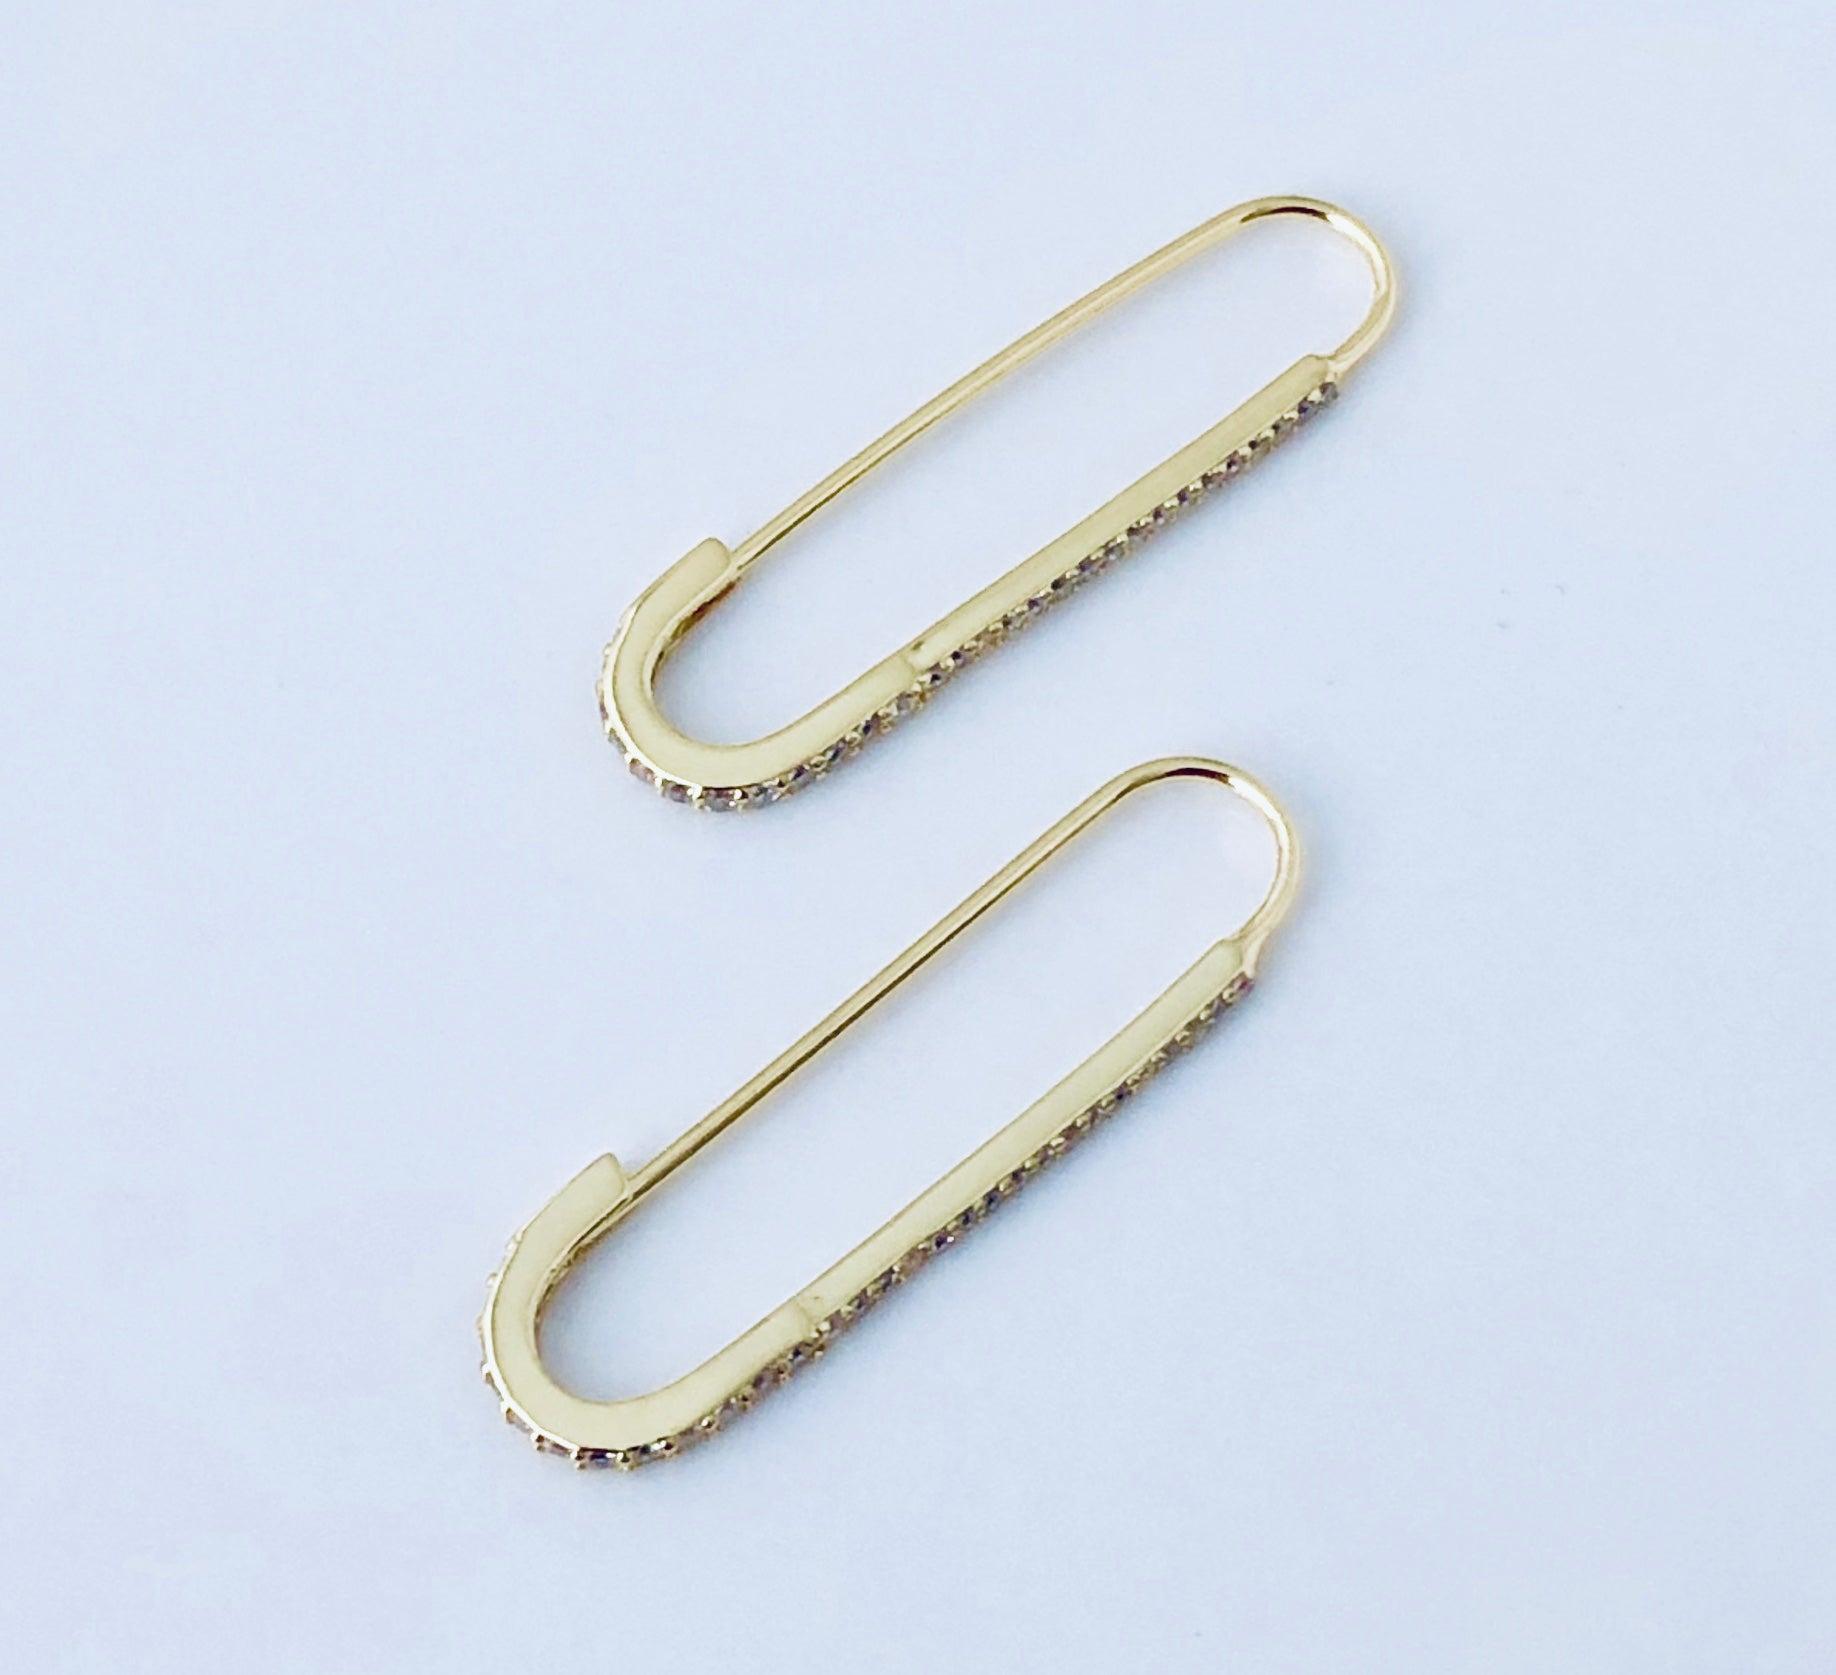 Safety Pin Earrings • Minimal Gold Safety Pin Earrings • Modern Geometric  Earrings, Perfect for Your Minimalist Look • ER087